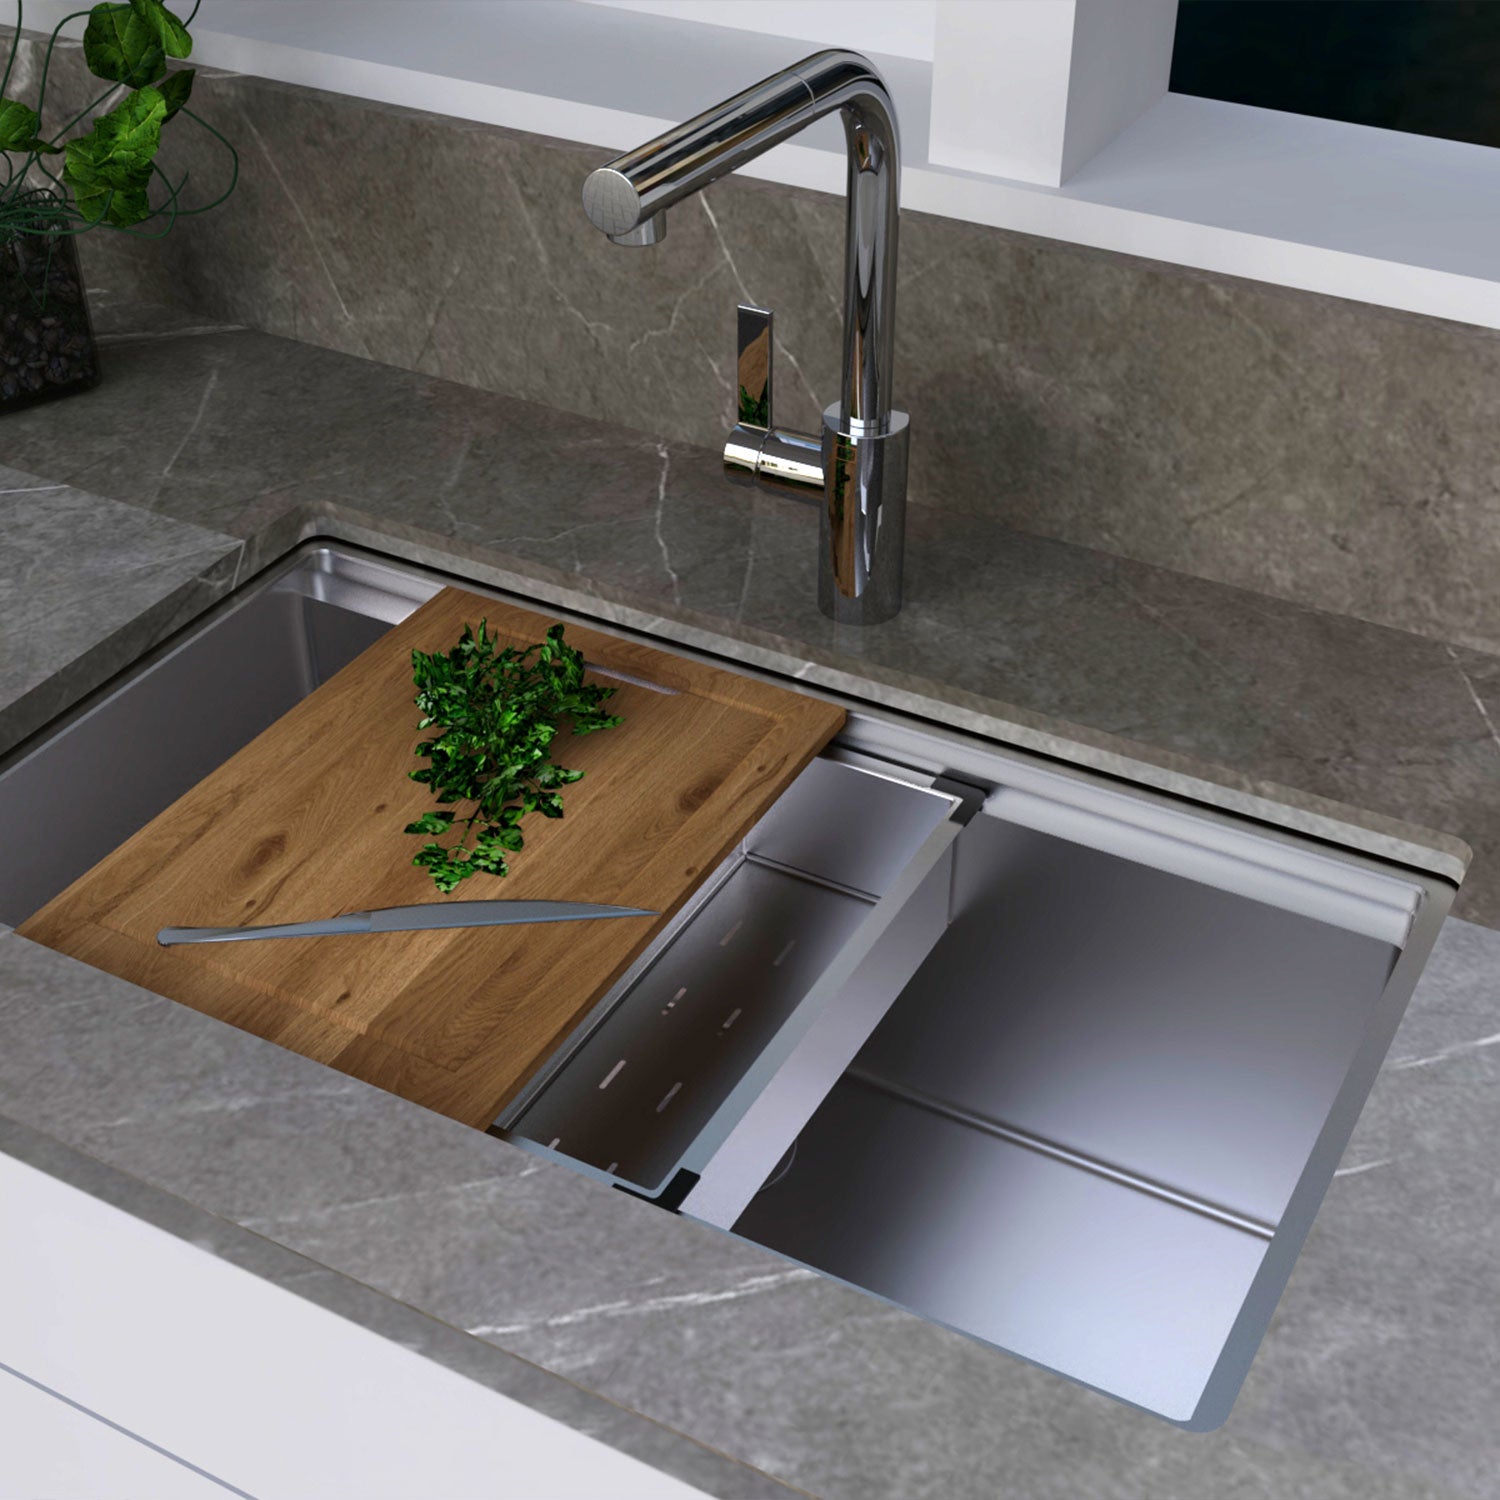 DAX Workstation Single Bowl Double Level Sink 30 x 18 - R10 - 18G. Accessories Included (DX-WS23019-R10)